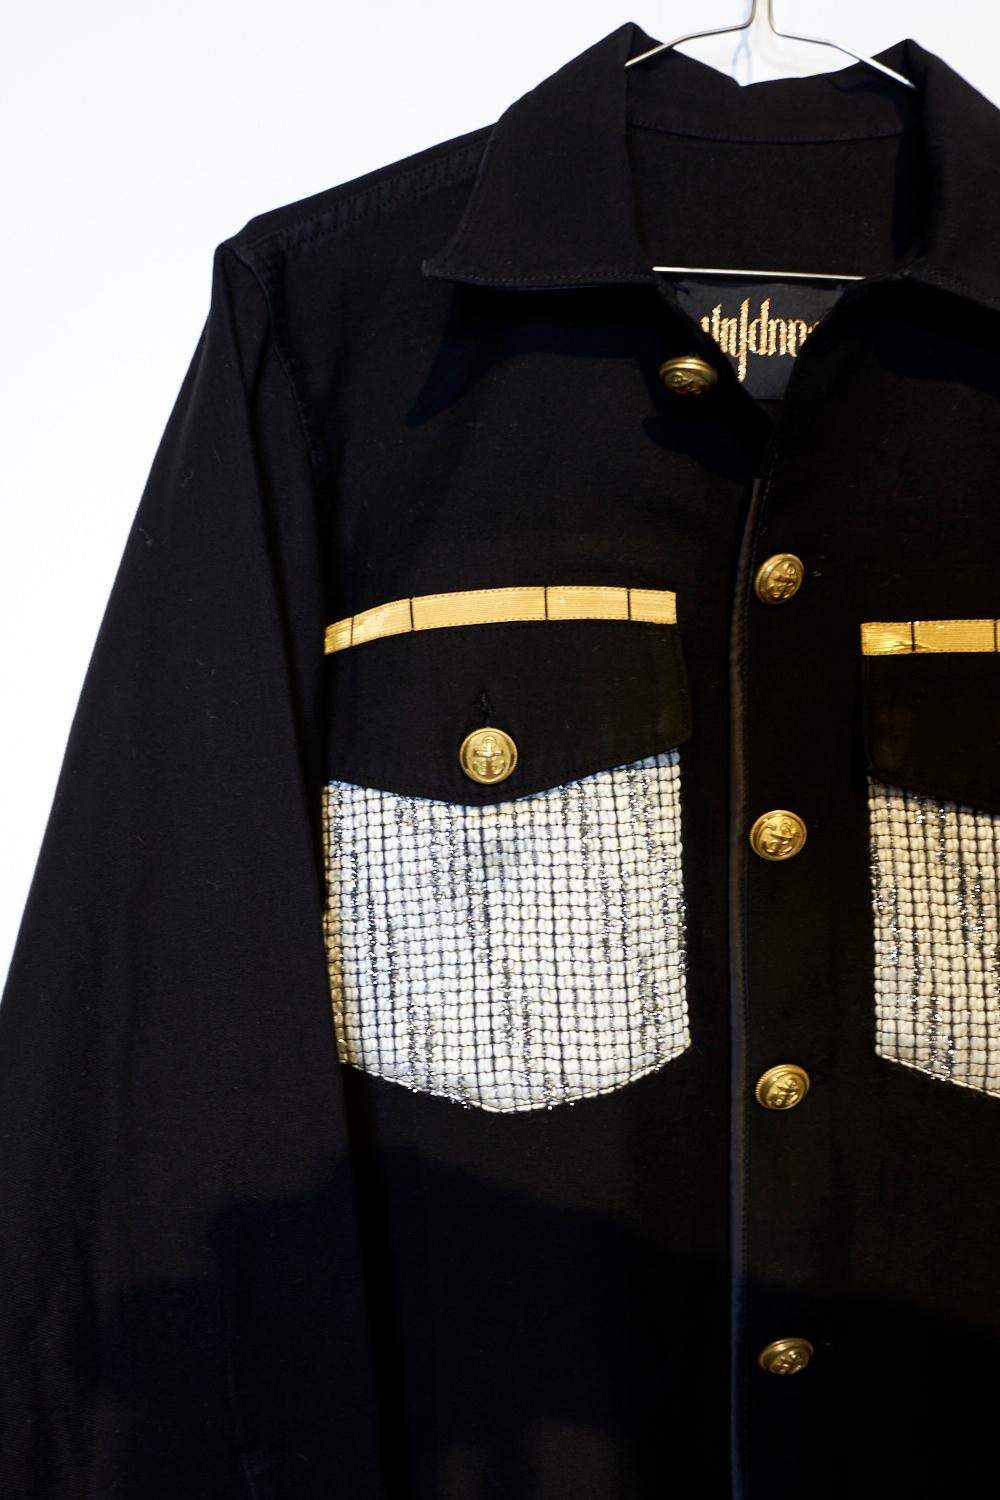 Embellished Repurposed Original Us Military Fatigue Shirt Dyed Black from the 70's in 100% Cotton. Embellished with Vintage Designer Lurex Tweed from France, Gold tone Brass Buttons, Details of Black Silk and Military Gold Braids.

Brand: J